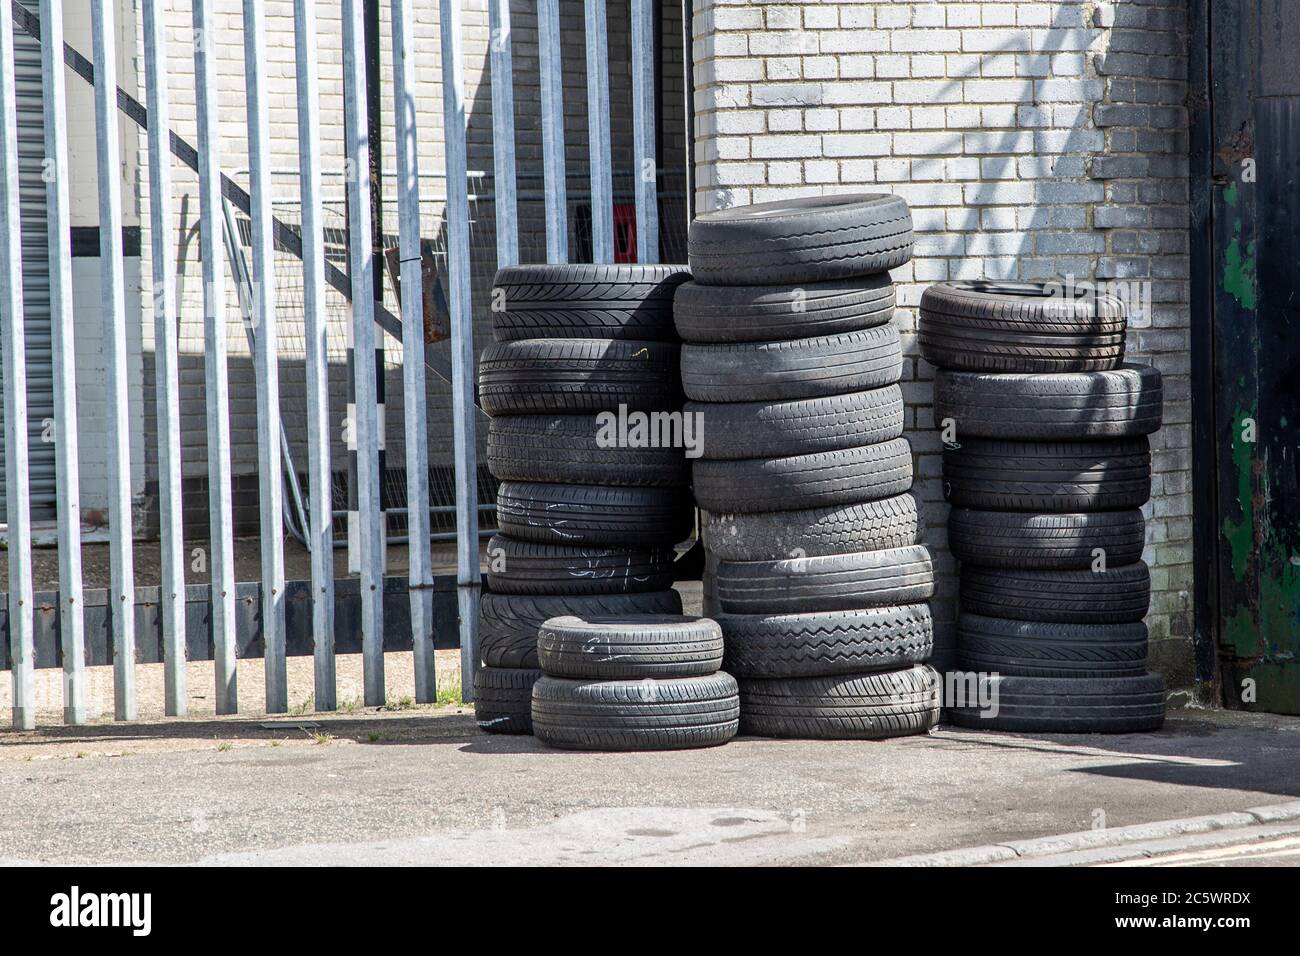 Used car tyres or tires stacked on top of each other outside a car garage or workshop Stock Photo